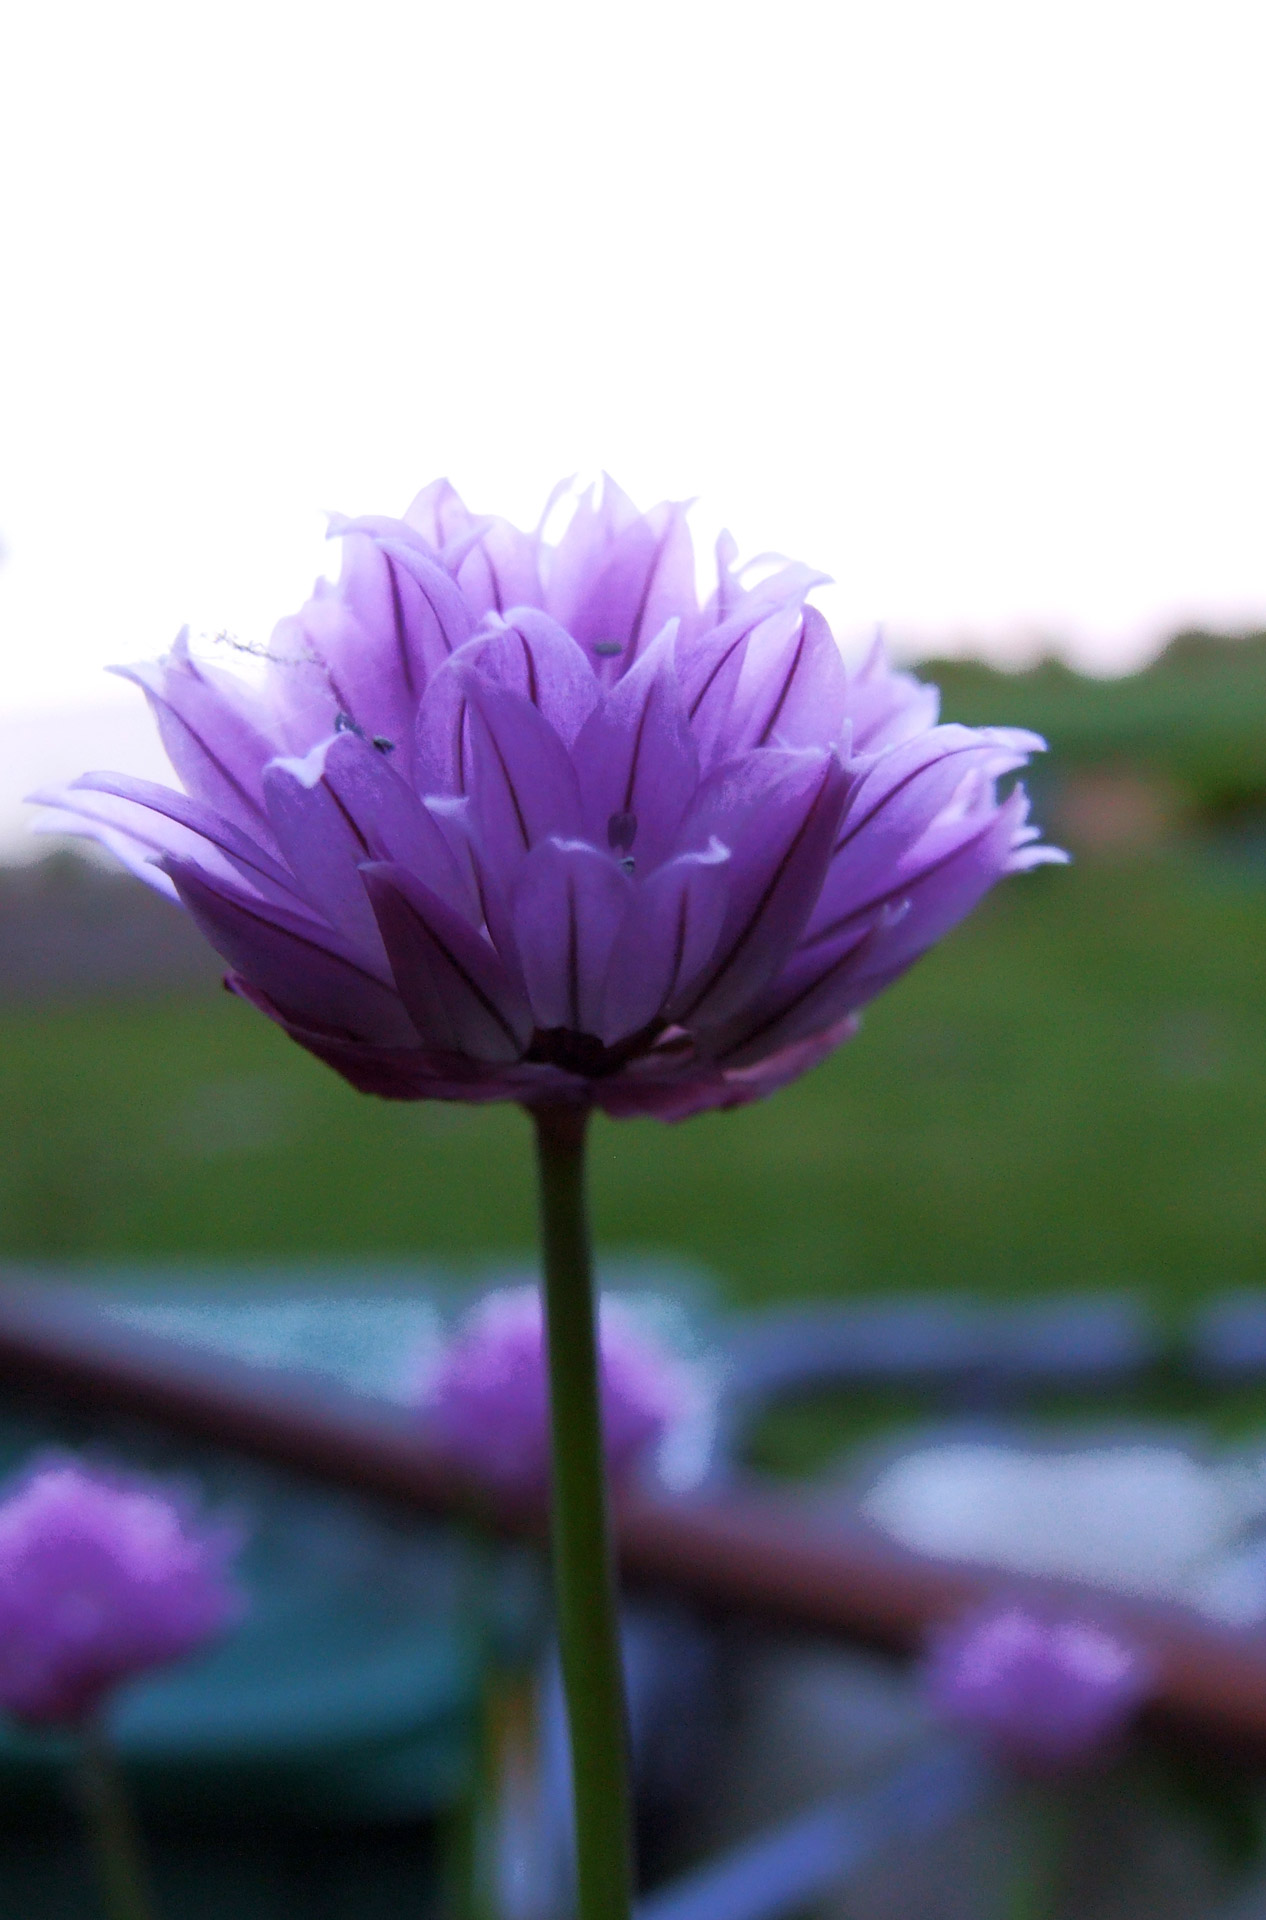 chive flower blossom free photo